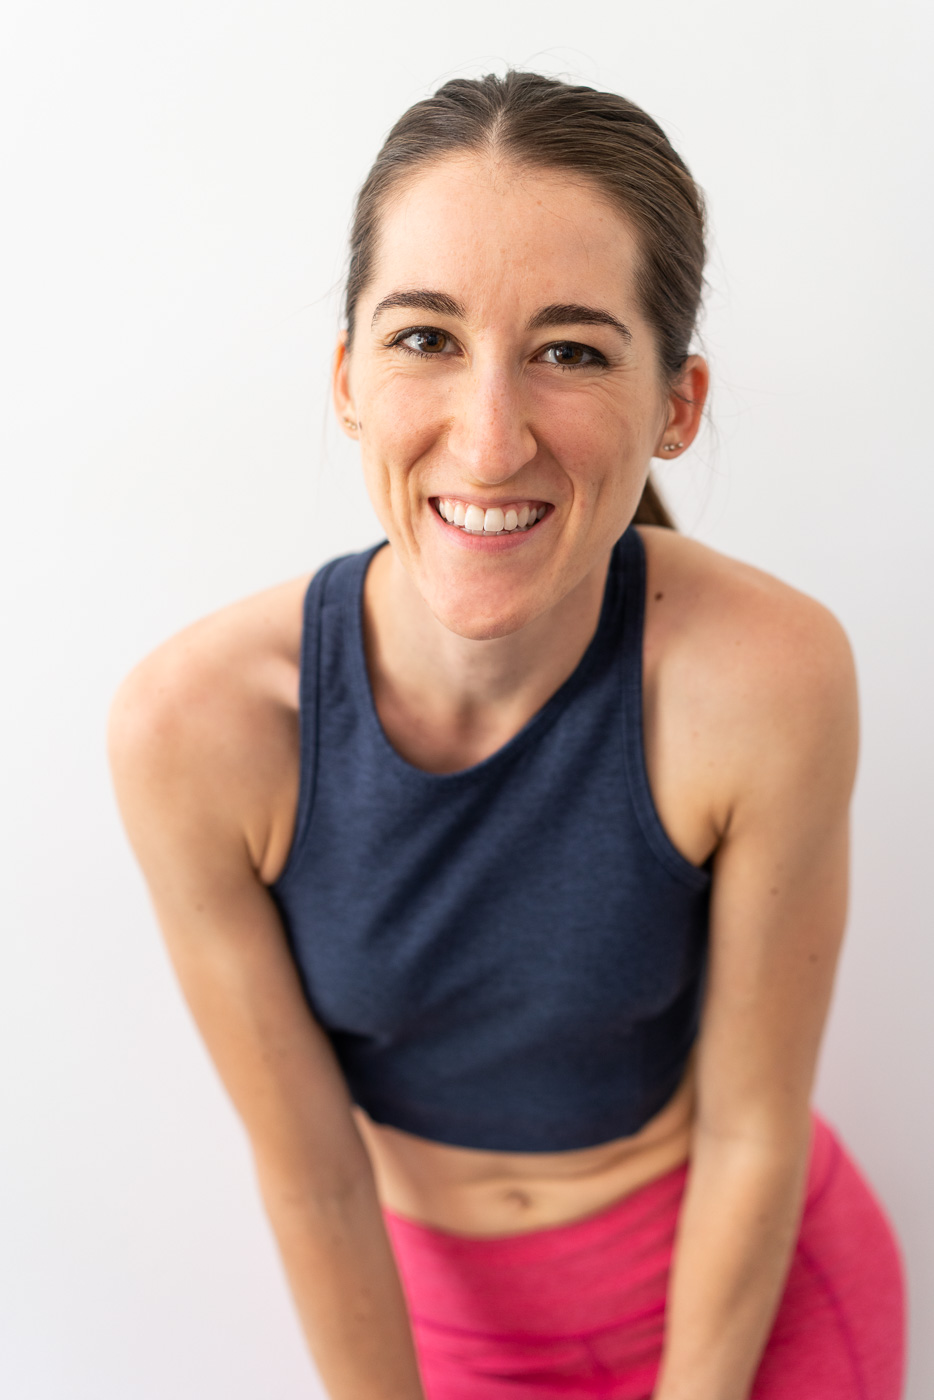 Woman in workout clothing leaning forward and smiling